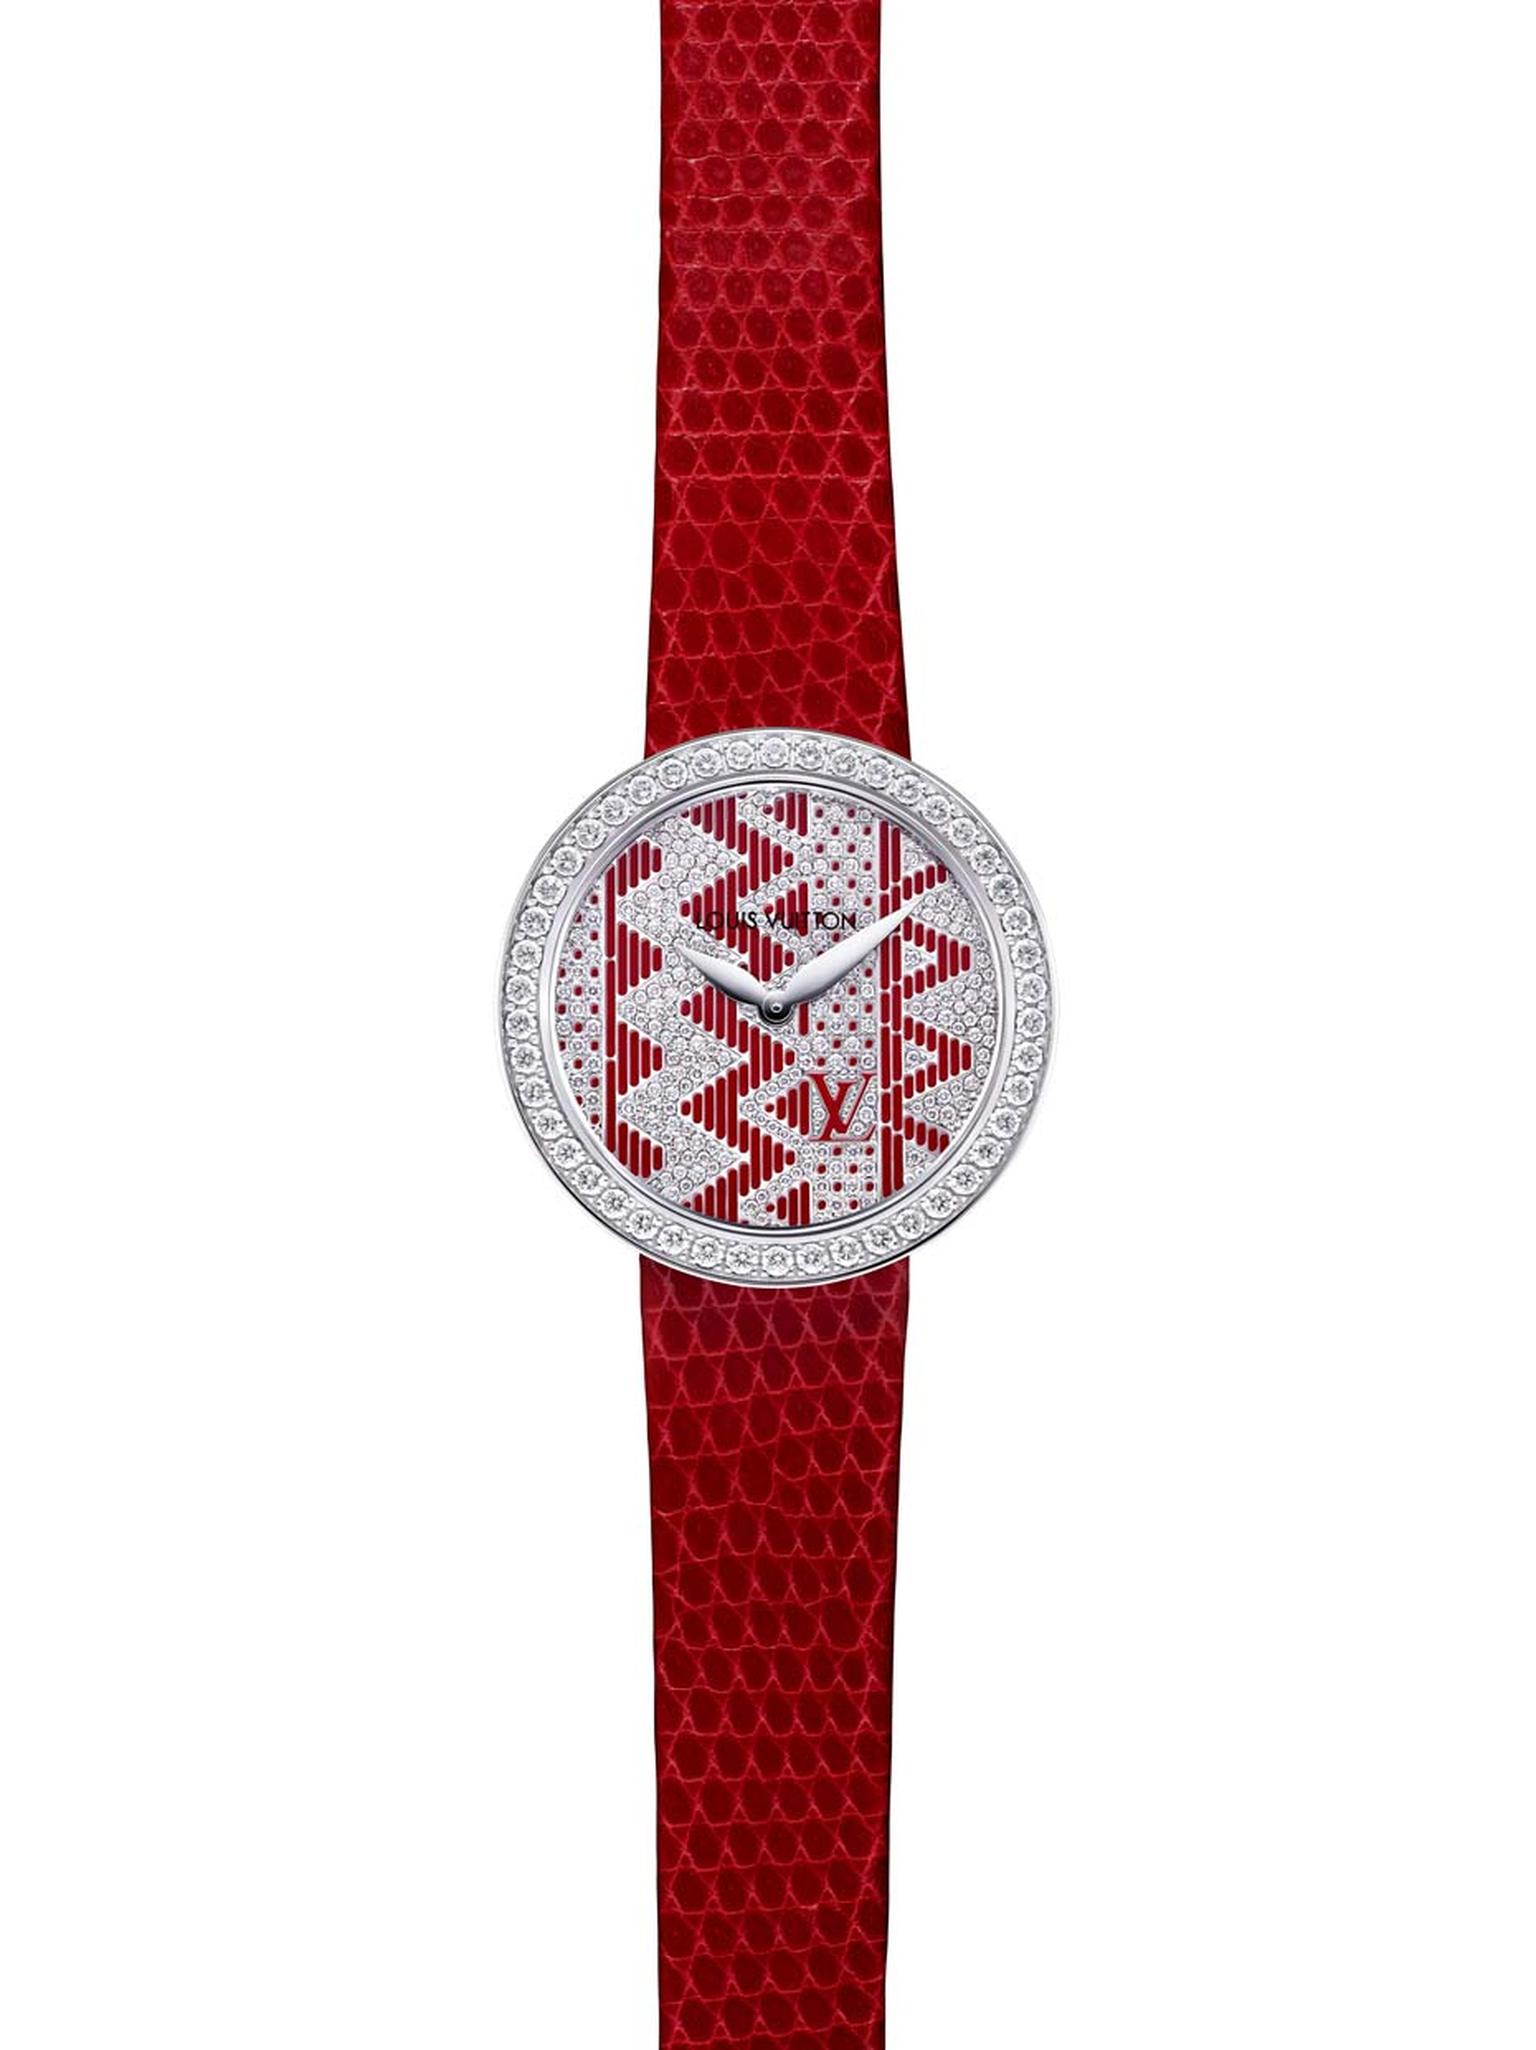 Each of the new Louis Vuitton Joaillerie Chevron watches is hand painted at Vuitton’s La Fabrique du Temps workshop in Geneva. This red lacquer version has a rhodium-plated white gold case, a dial set with 222 diamonds and a red lizard strap.